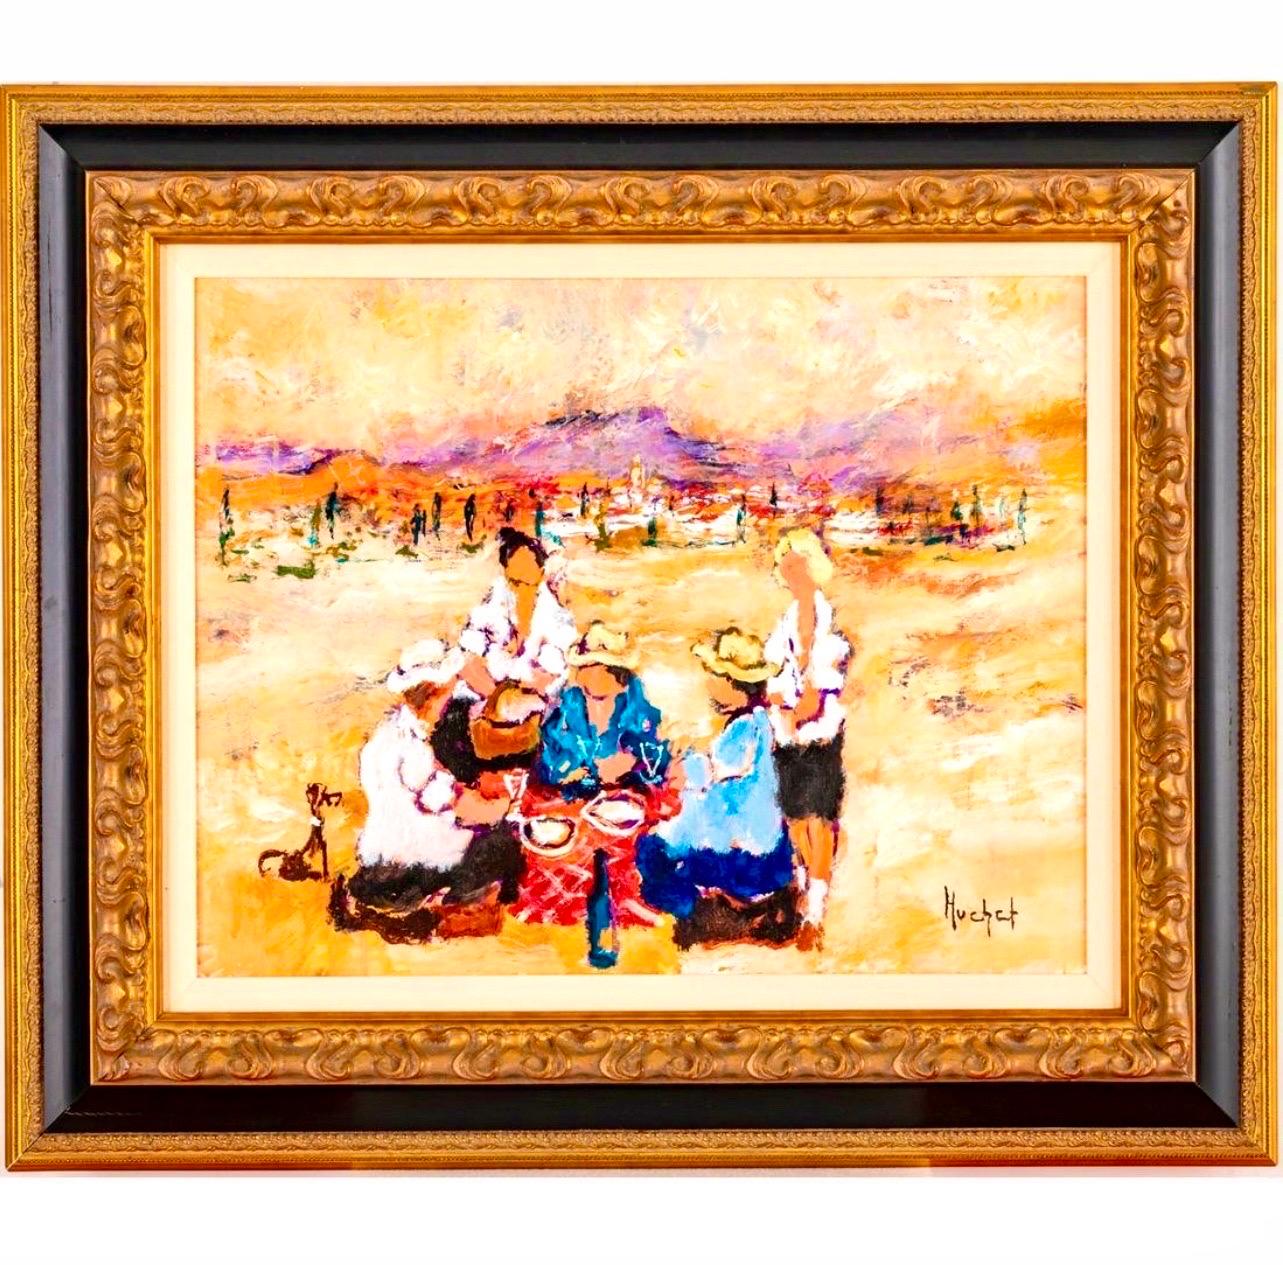 Urbain Huchet (French, 1930-2014)
La Pause De Midi,  
Acrylic on canvas, (the certificate was marked acrylic but it seems like oil to me. I am not positive)
Hand signed lower right. 
Framed dimensions: H: 30 x W: 35.25 in. Image H: 19.5 W: 25